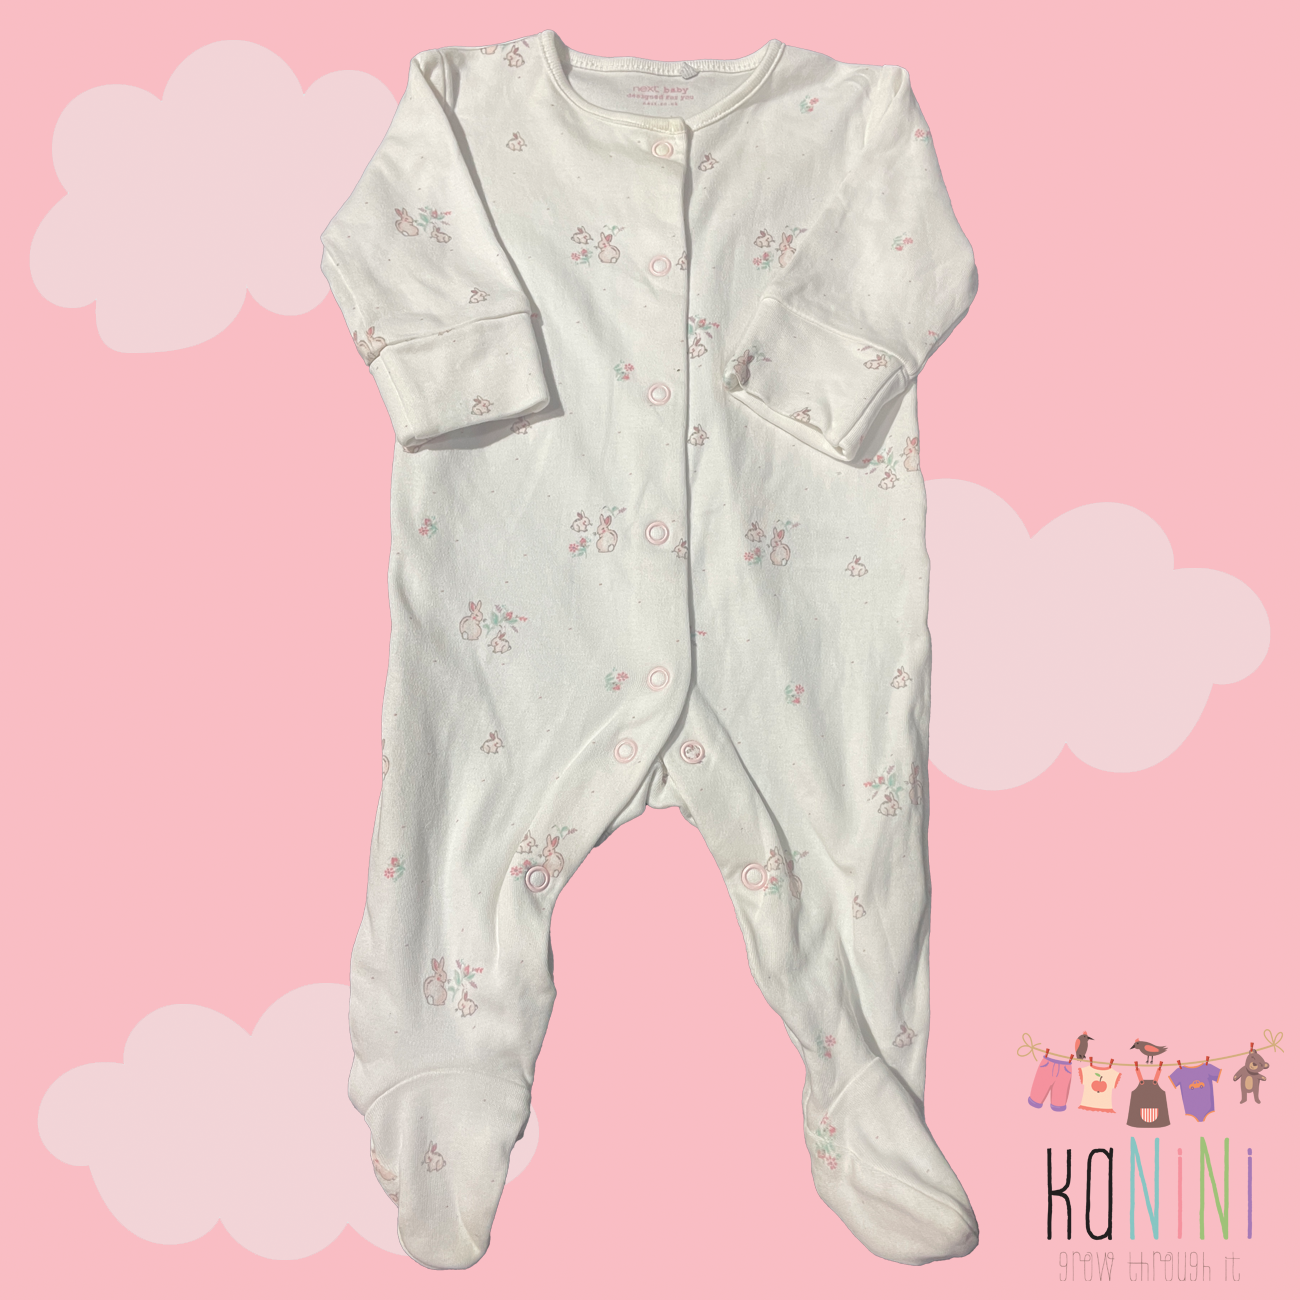 Featured image for “UK Next 0 - 3 Months Girls Bunny Print Babygrow”